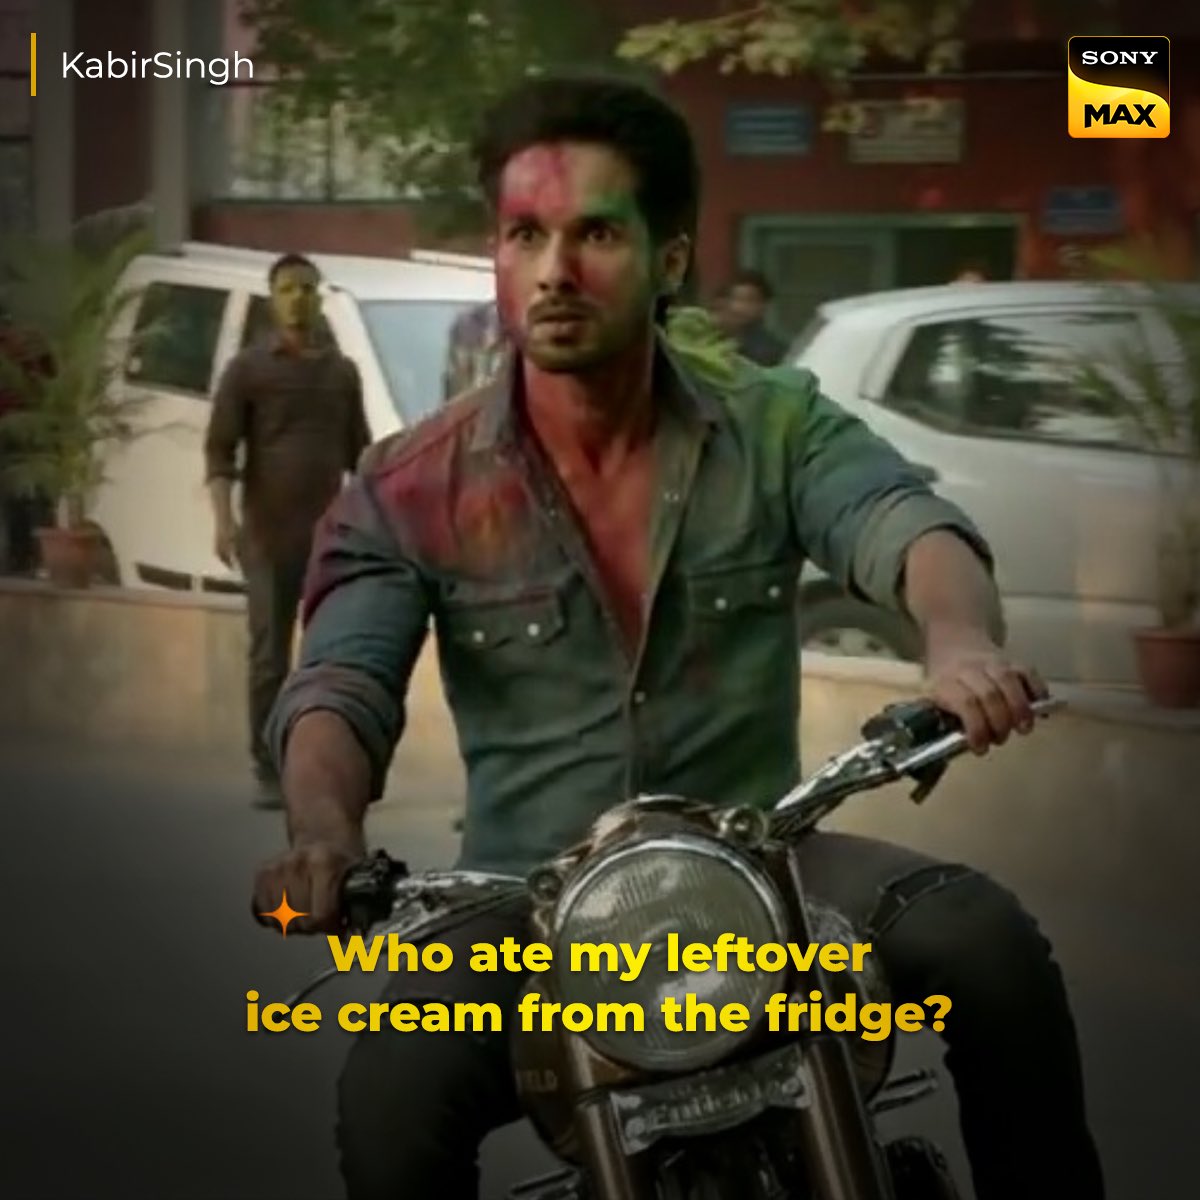 Instantly points the finger at our dog👀 #DeewanaBanaDe #KabirSingh #Movies #Cinema #Bollywood